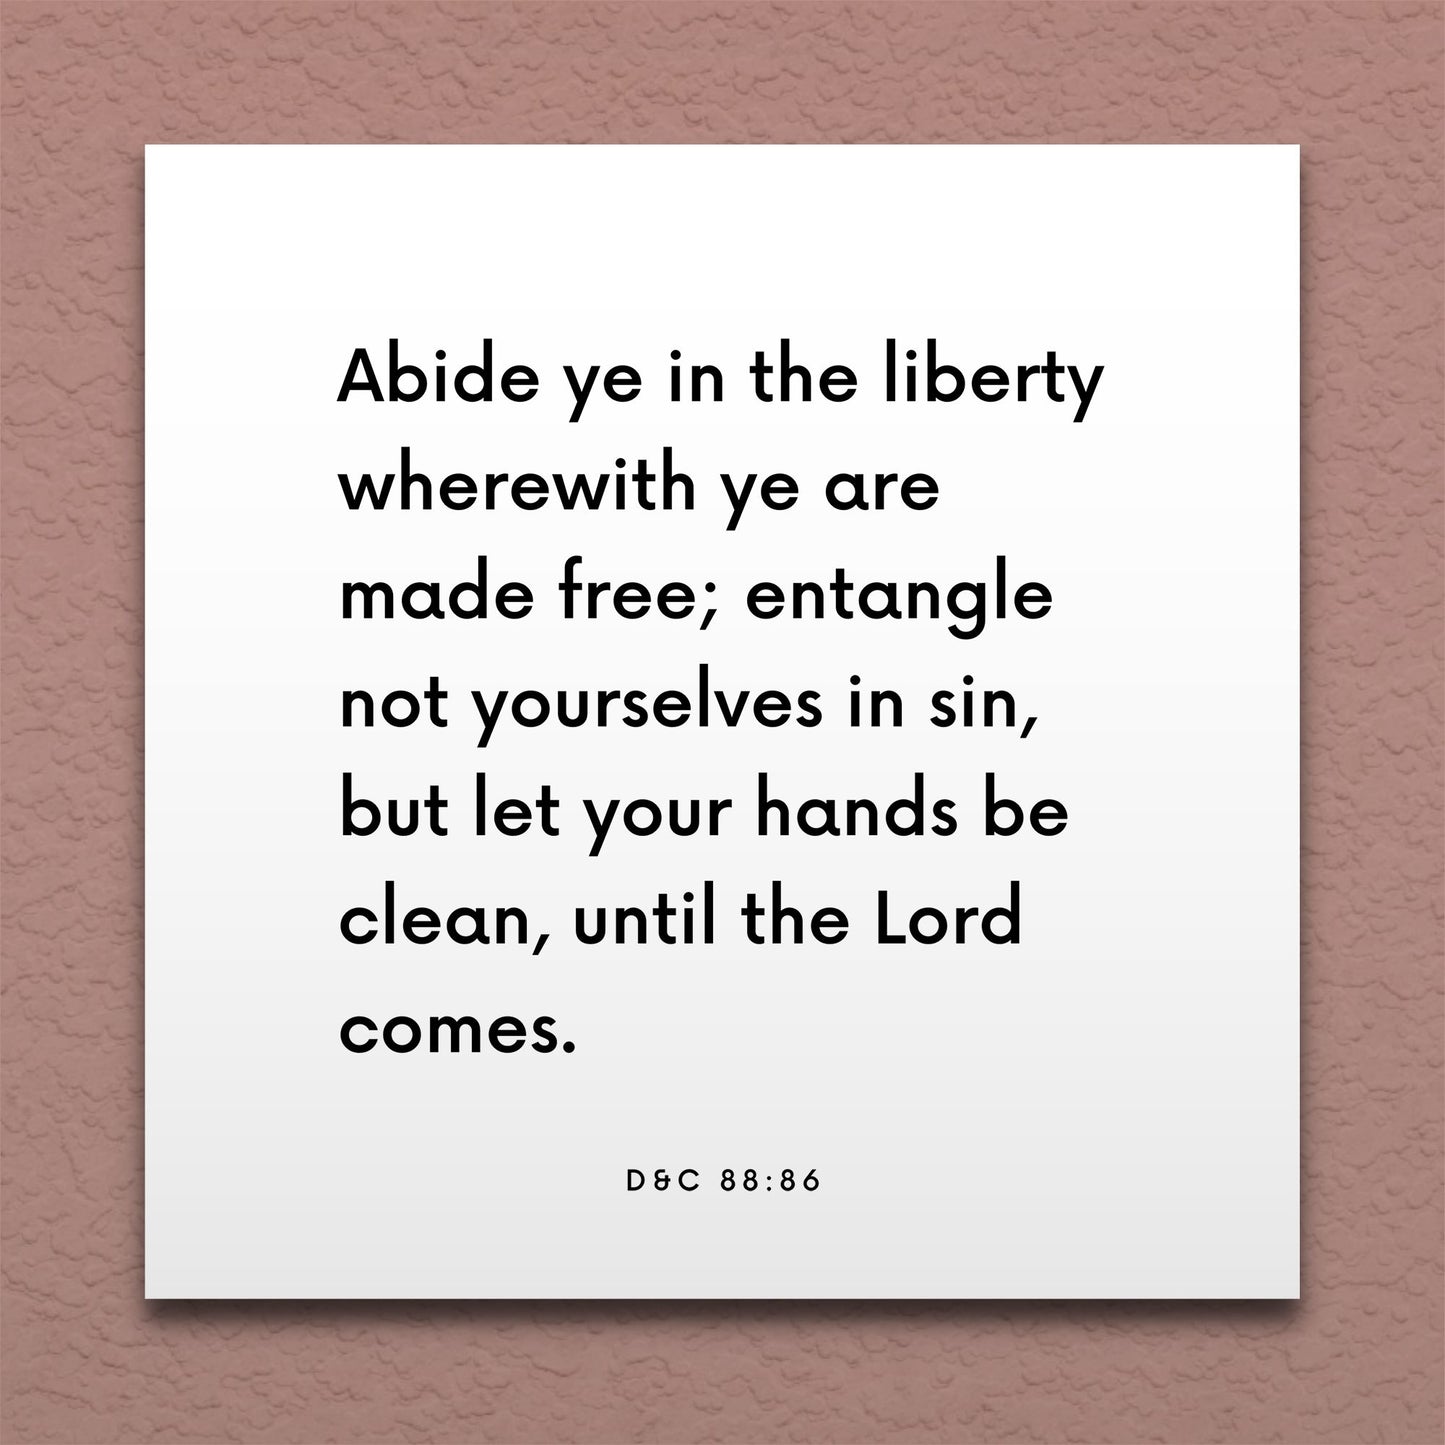 Wall-mounted scripture tile for D&C 88:86 - "Abide ye in the liberty wherewith ye are made free"